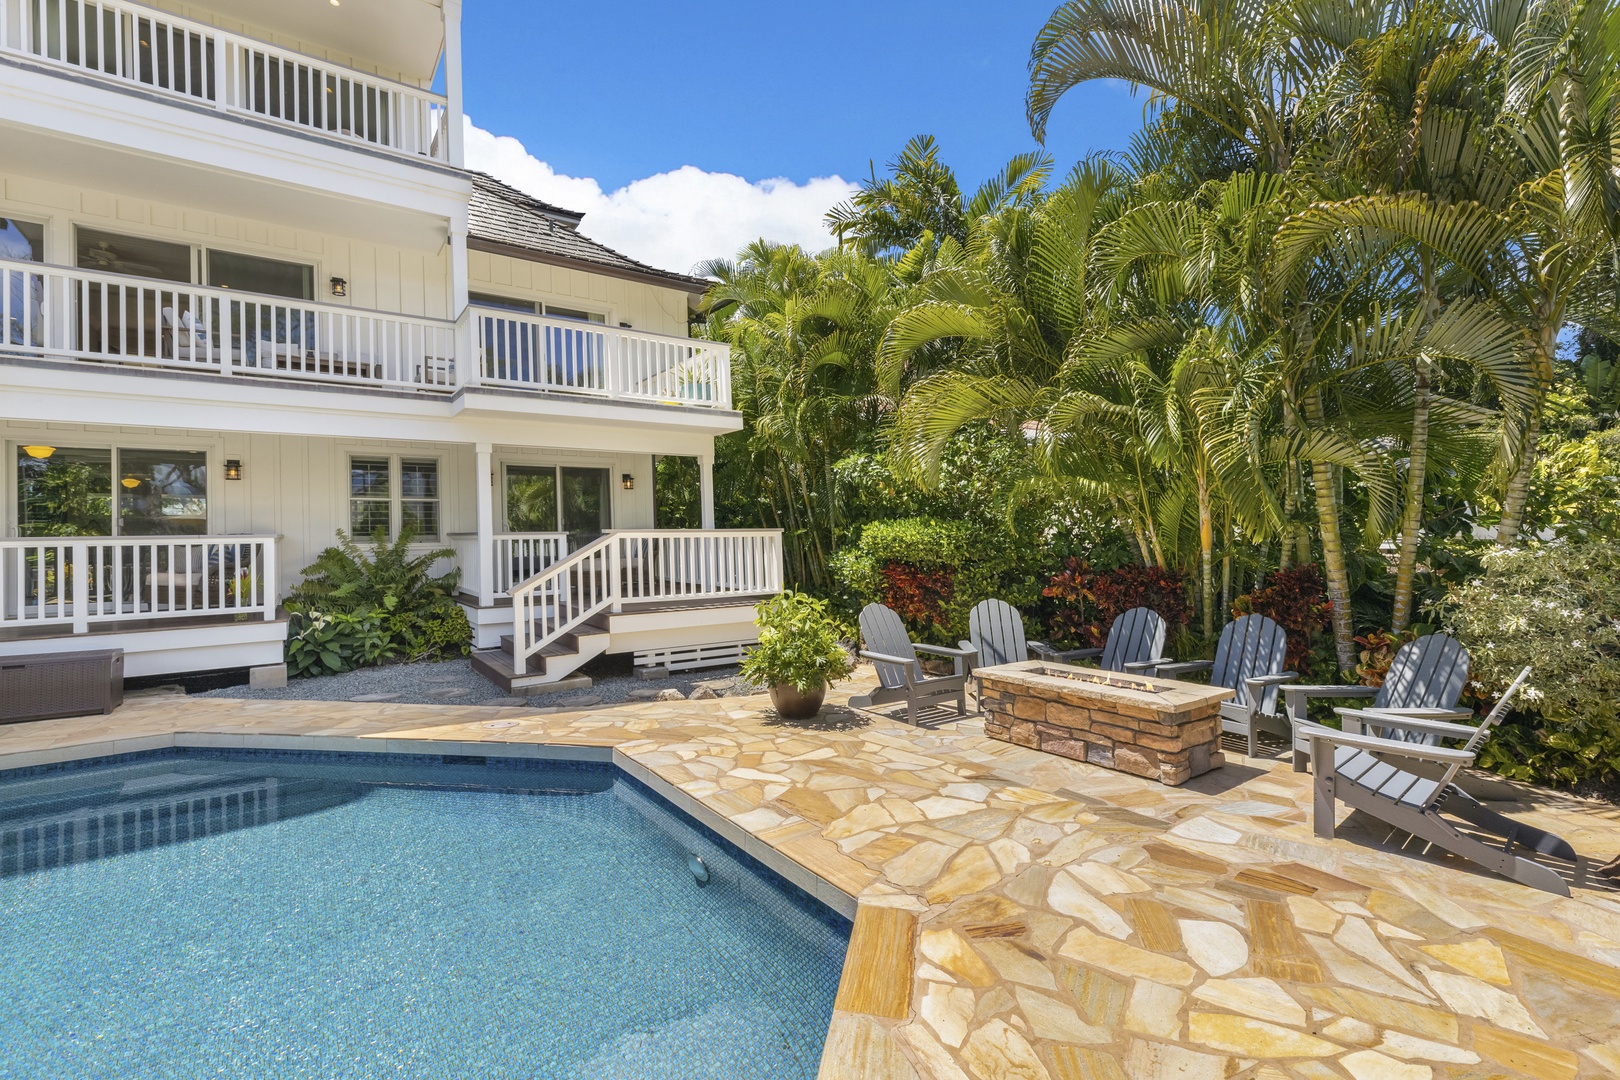 Honolulu Vacation Rentals, Hale Le'ahi* - The pool are is the perfect space for entertaining guests outdoors